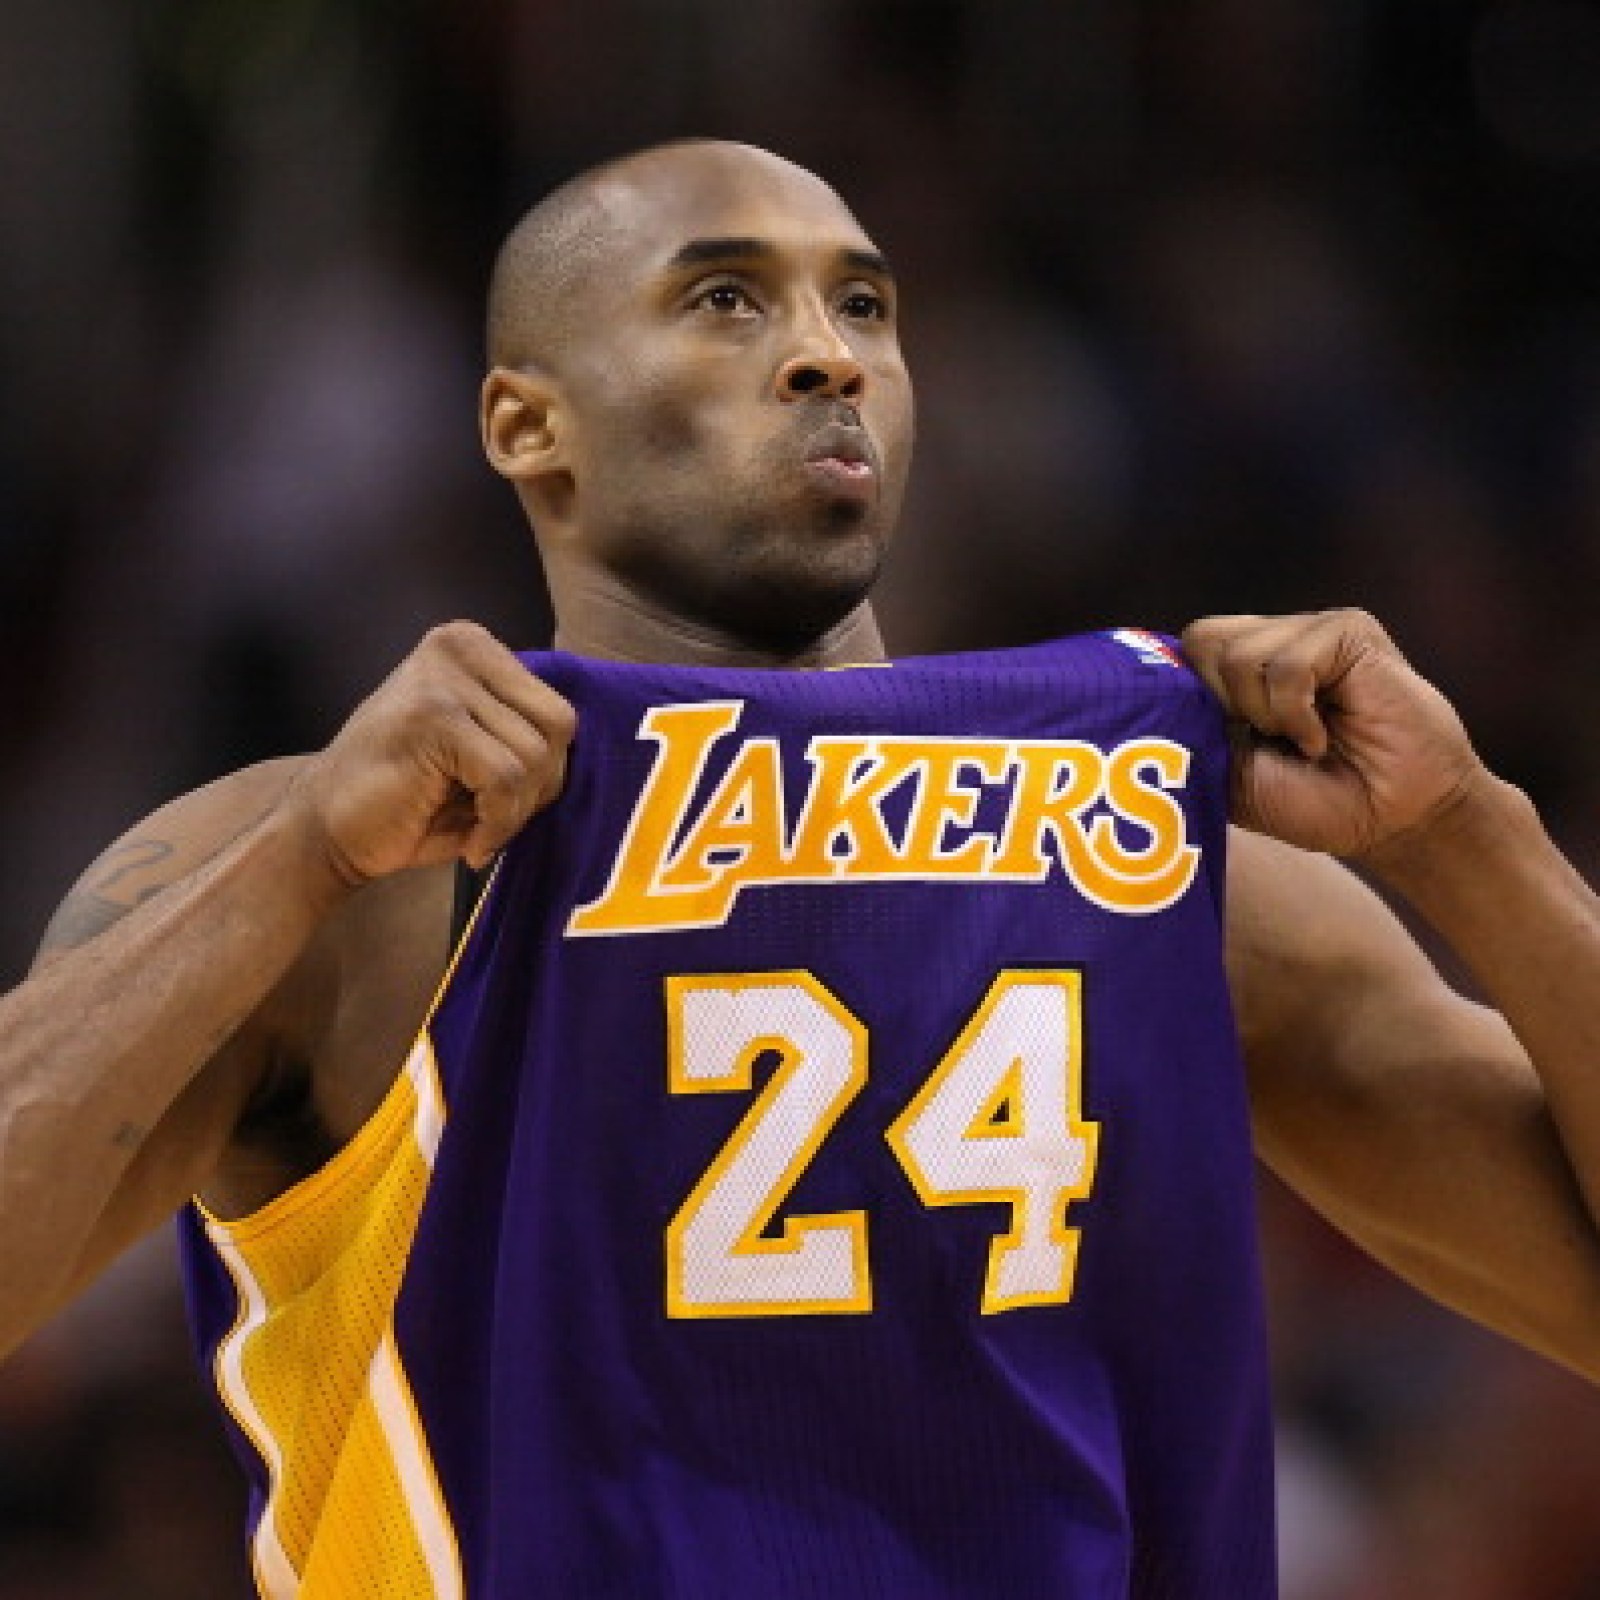 Kobe Bryant's accomplishments by the numbers[8]